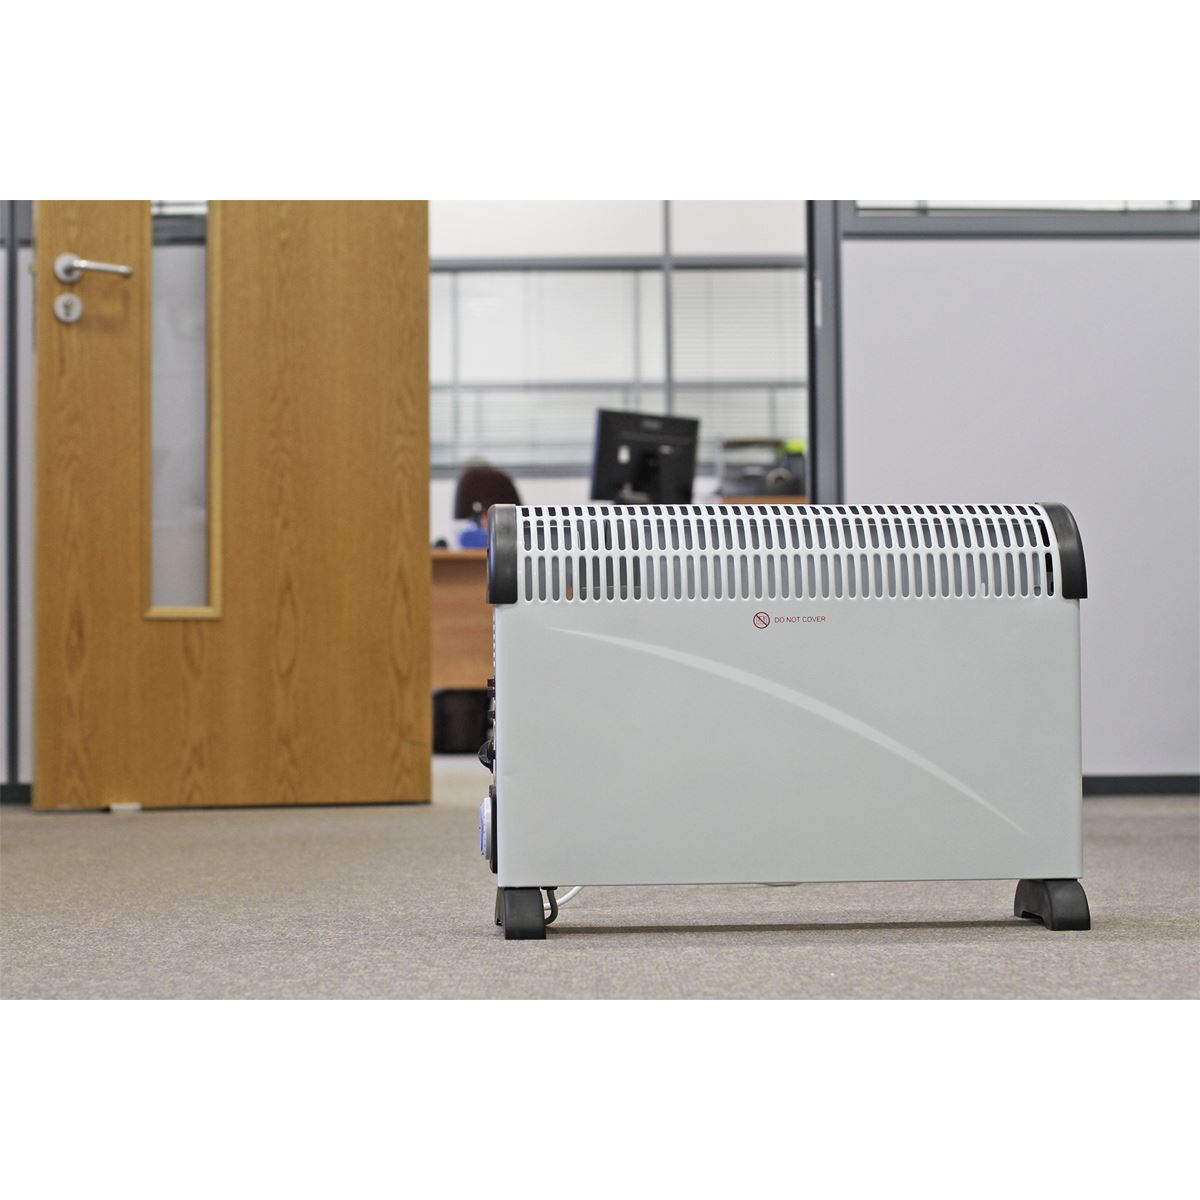 Sealey Convector Heater 2000W/230V with Turbo, Timer & Thermostat